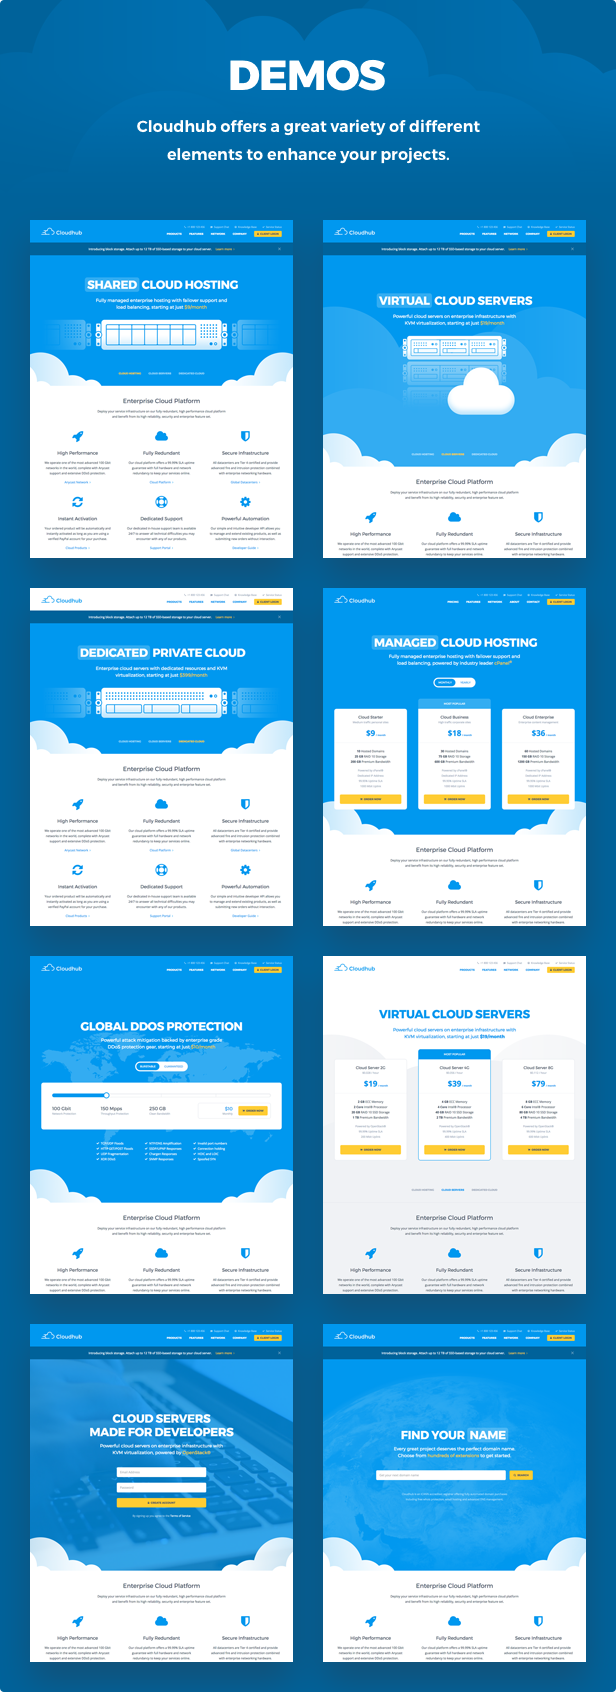 banner demos - Cloudhub - Hosting and Technology HTML Template